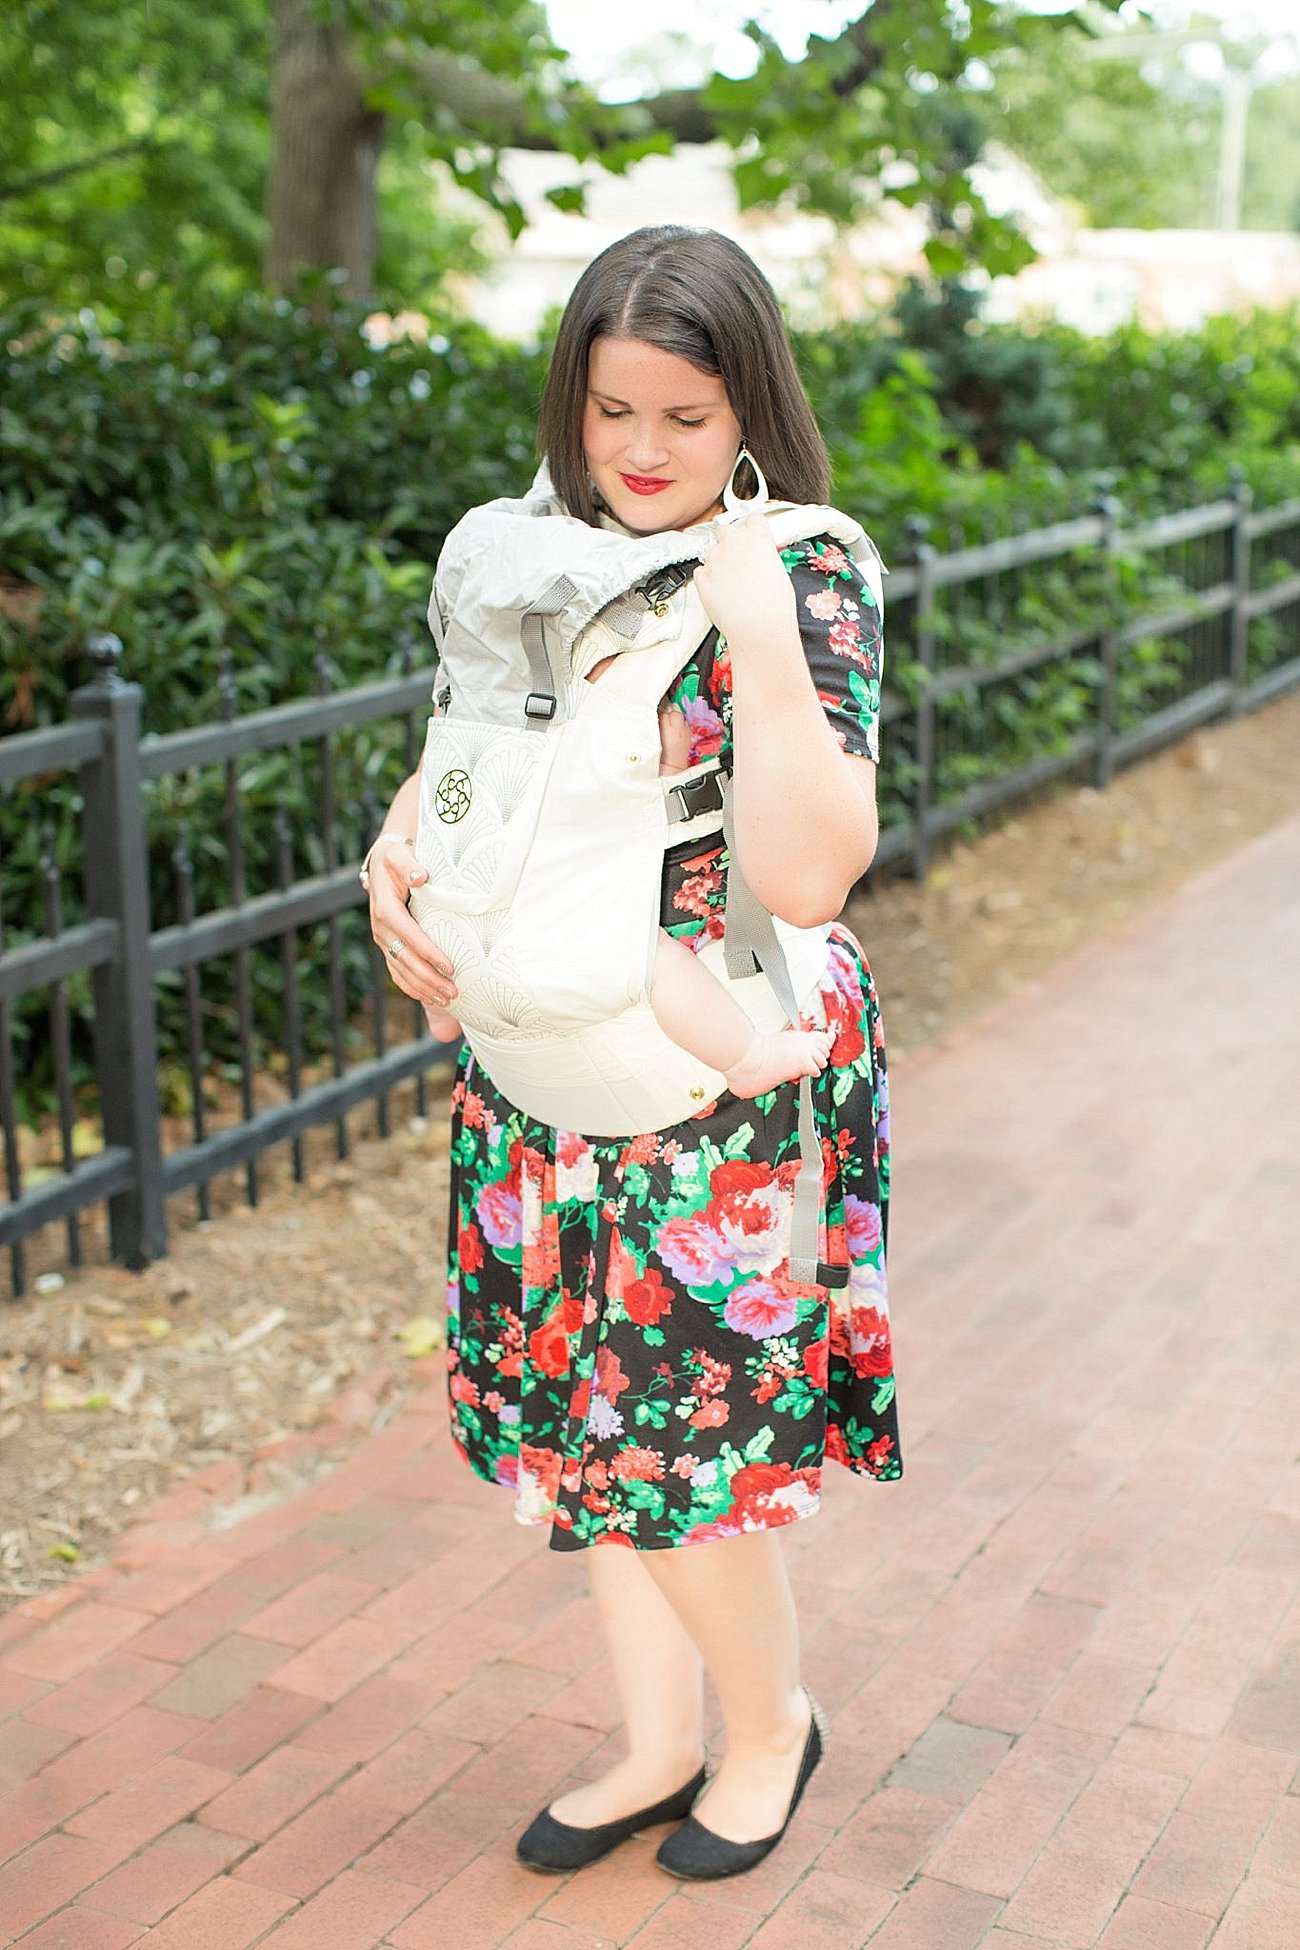 LulaRoe floral Amelia dress, Lillebaby Complete Embossed Luxe carrier in Brilliance, The Root Collective shoes, Kalencom "Berlin" Diaper Bag | North Carolina Fashion Blogger (9)